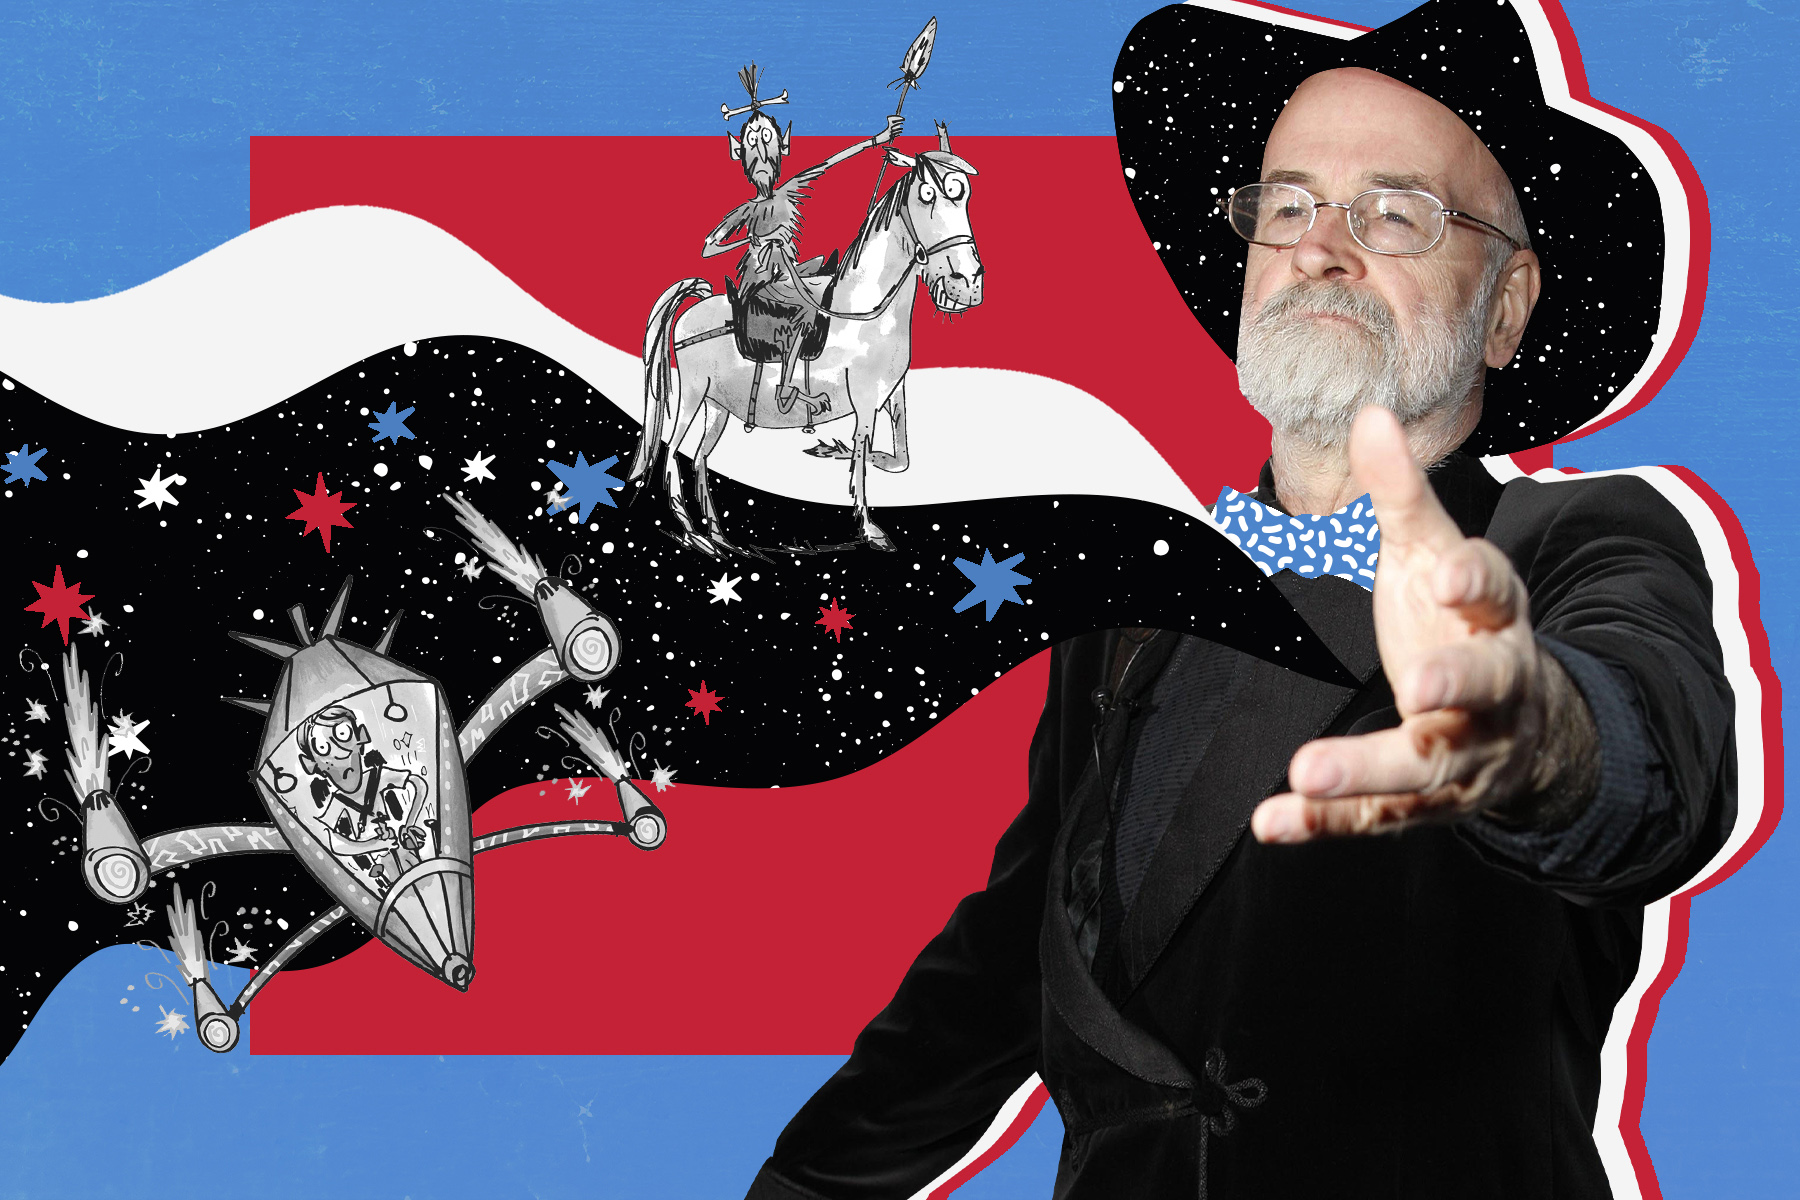 An image of the author Terry Pratchett, on a red and blue background, holding out his hand as though he is casting a spell and there are a couple of illustrations from his books riding the wave